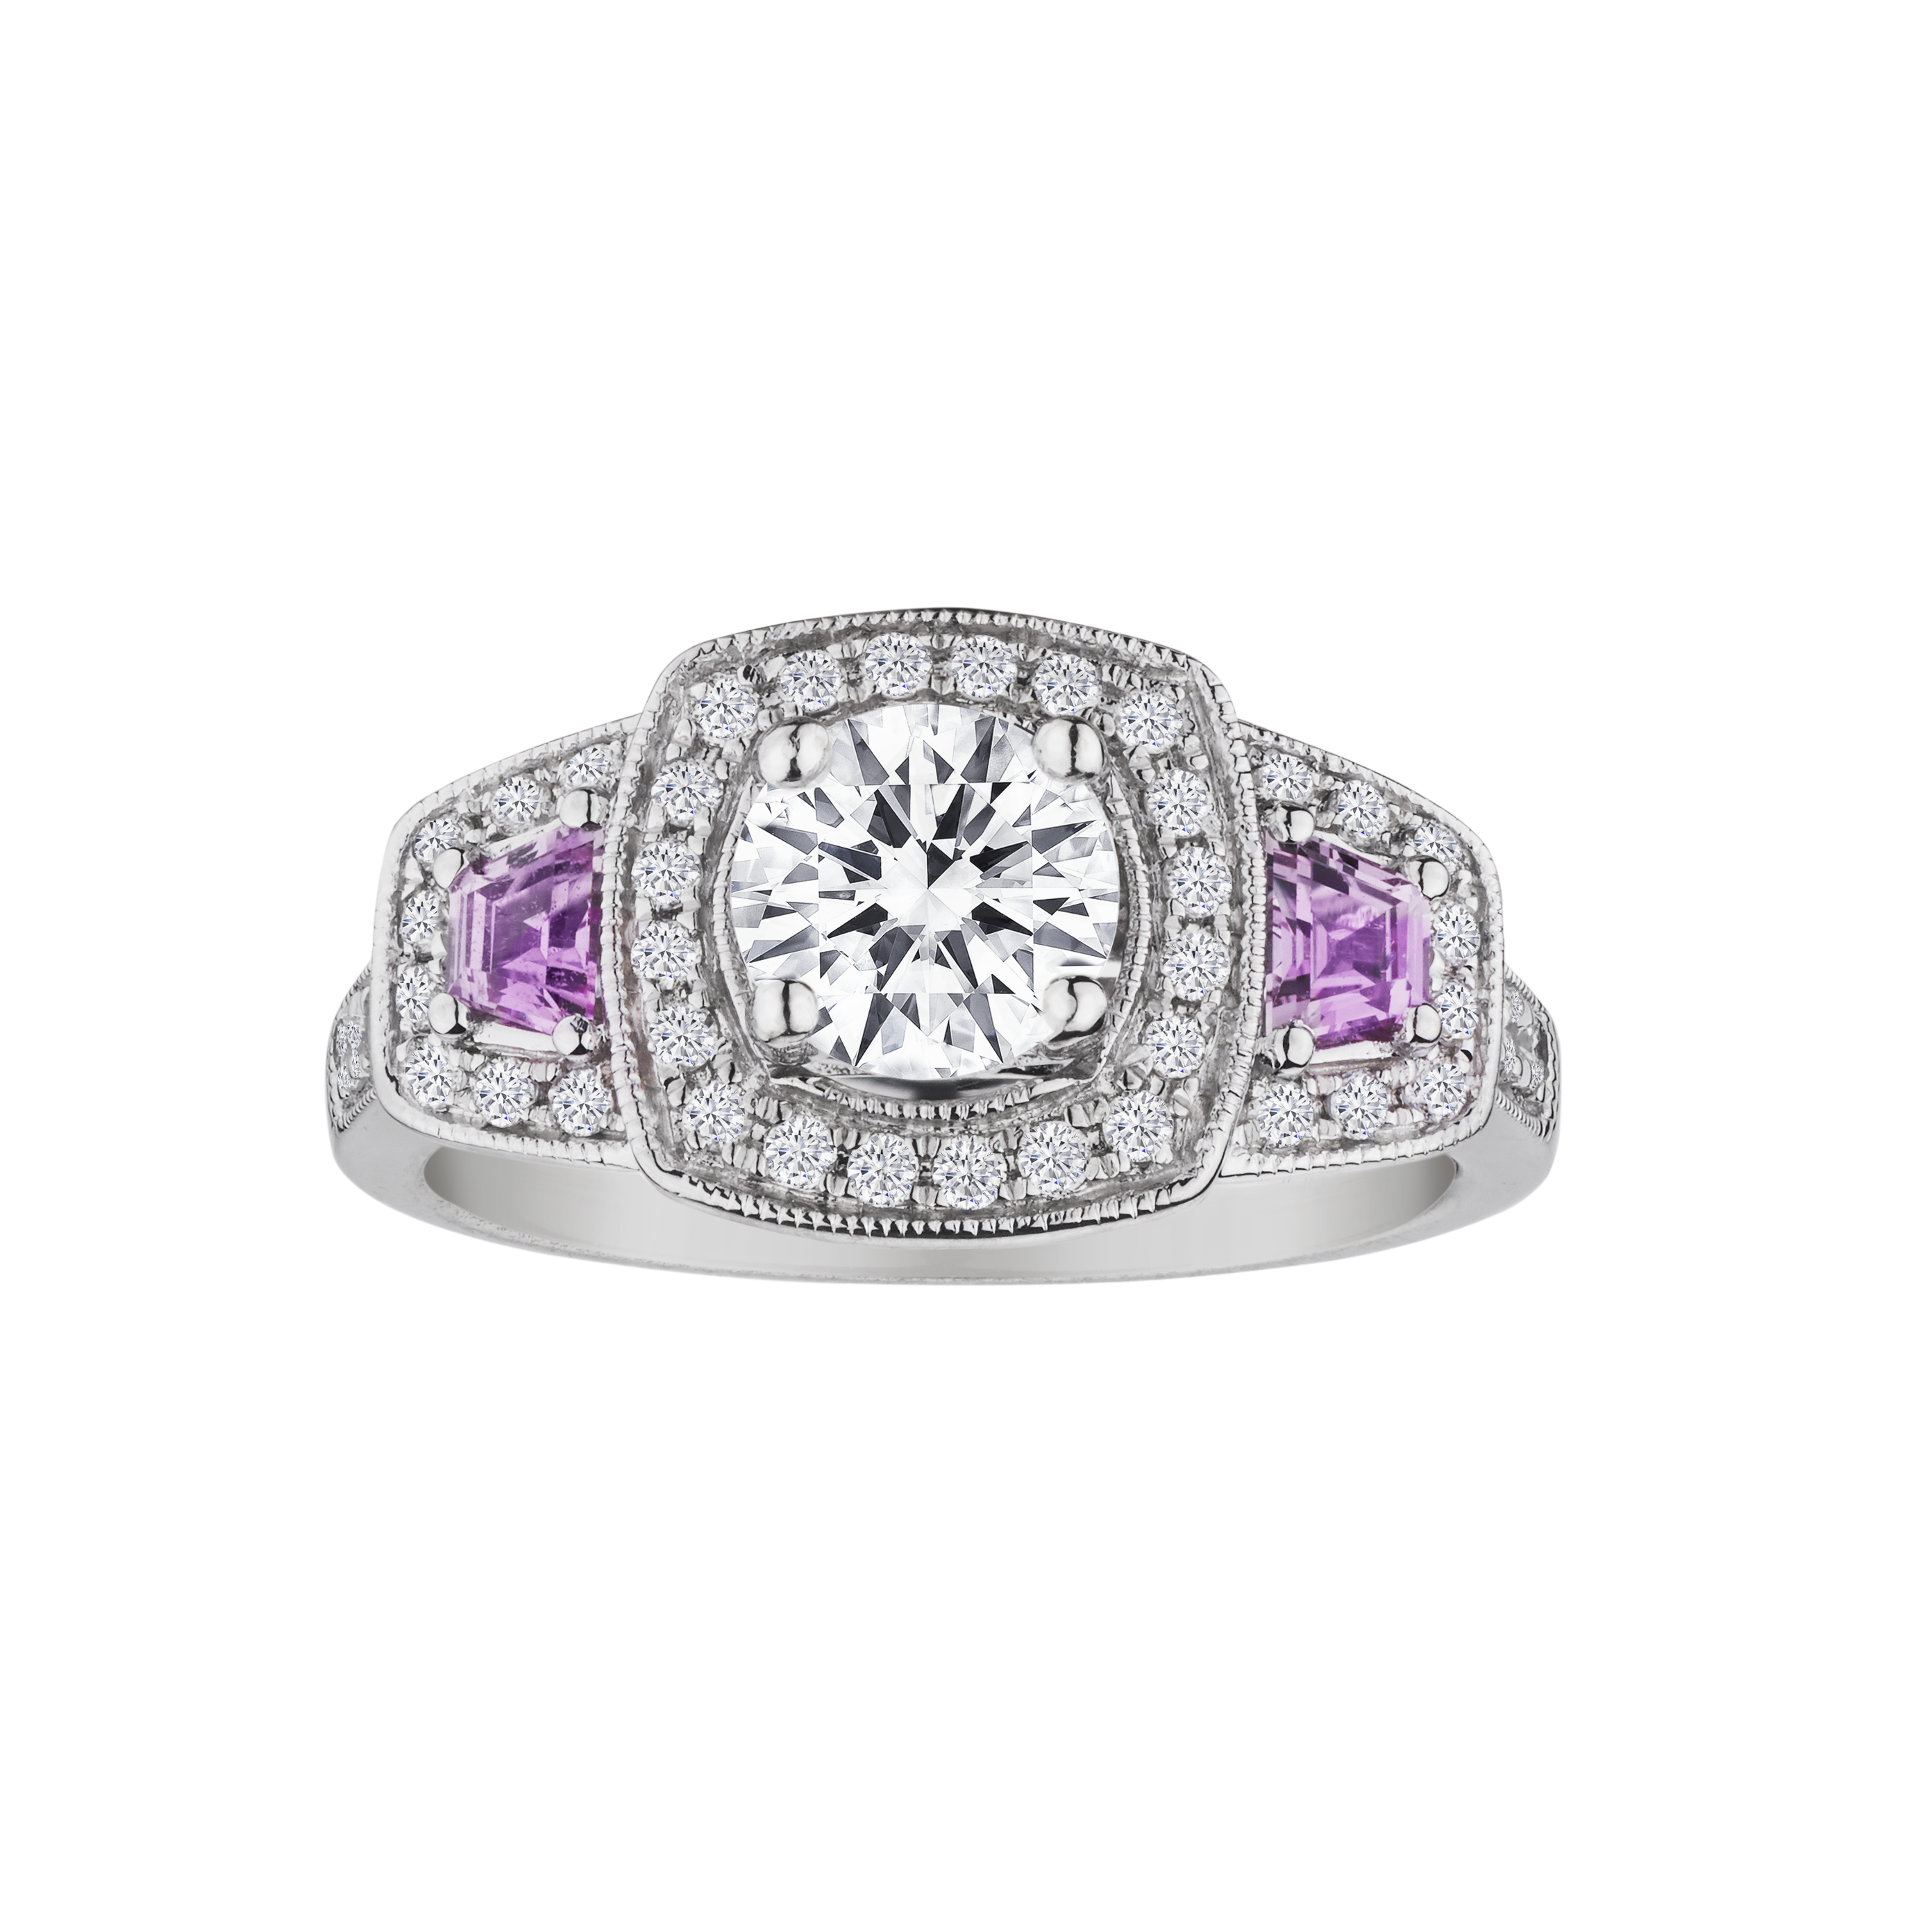 1.80 Carat of Genuine Moissanite, Pink Sapphire and Diamonds Ring,  "Past, Present, Future". Gemstone Rings. Griffin Jewellery Designs